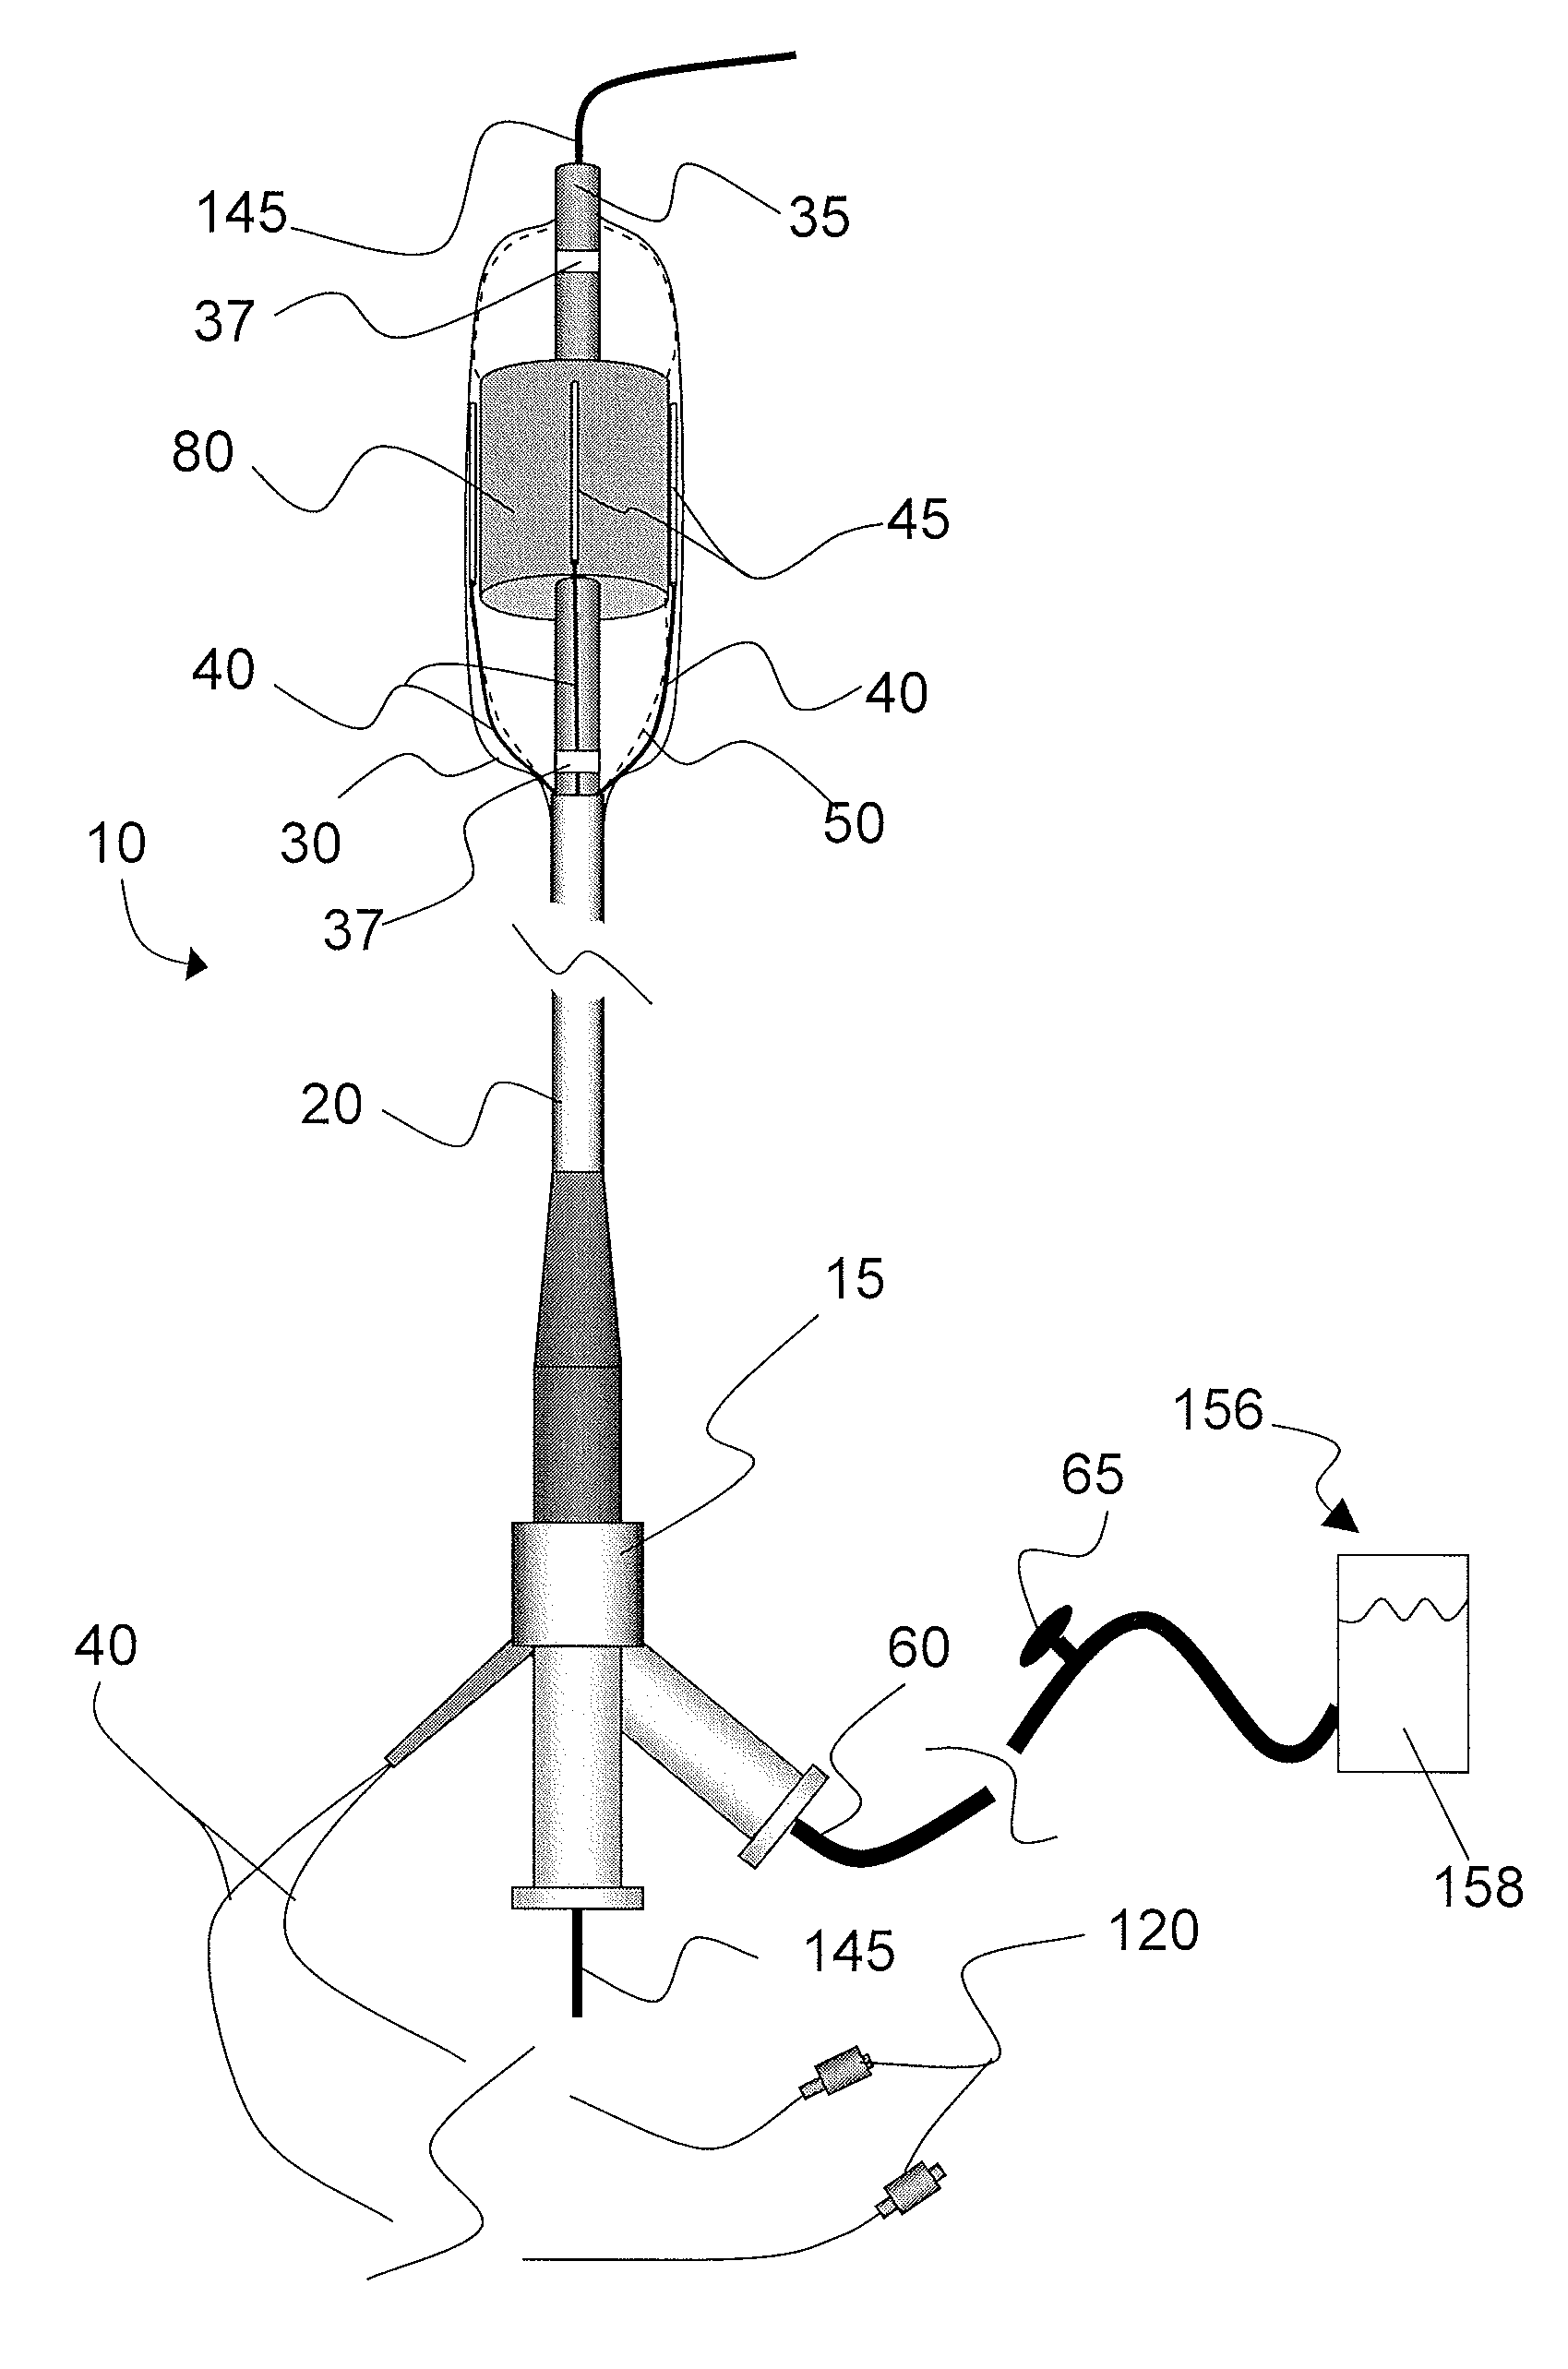 Systems and methods for analysis and treatment of a body lumen